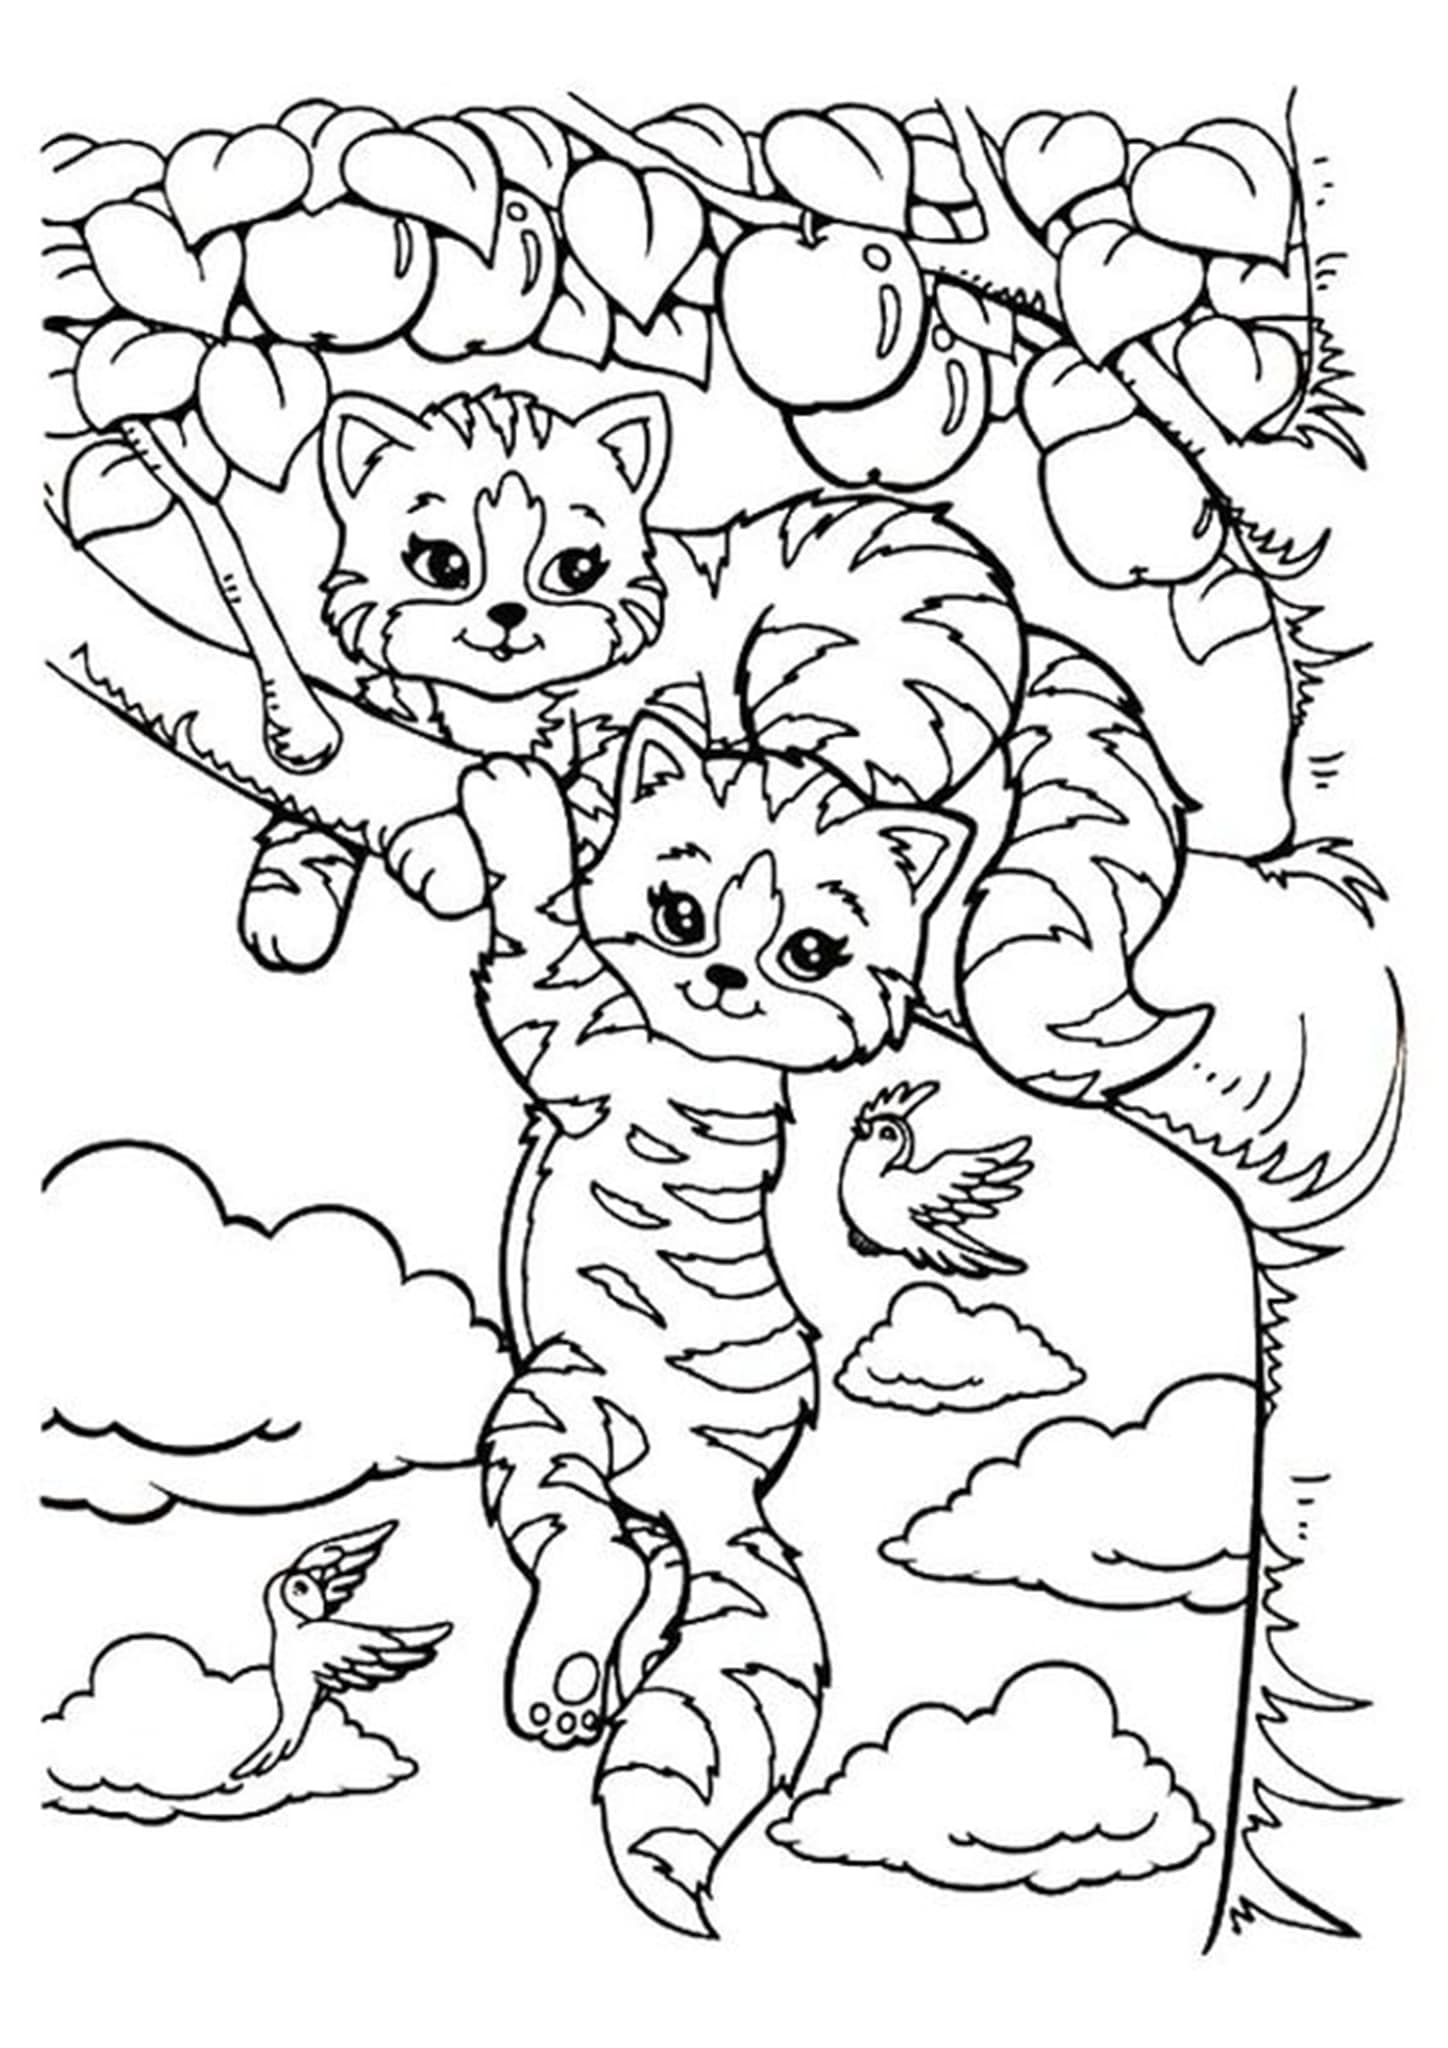 15 Coloring Page Printable Coloring Tiger Who Came To Tea Colouring Pics Unlimit3rdlutindices Bargsm Klpon